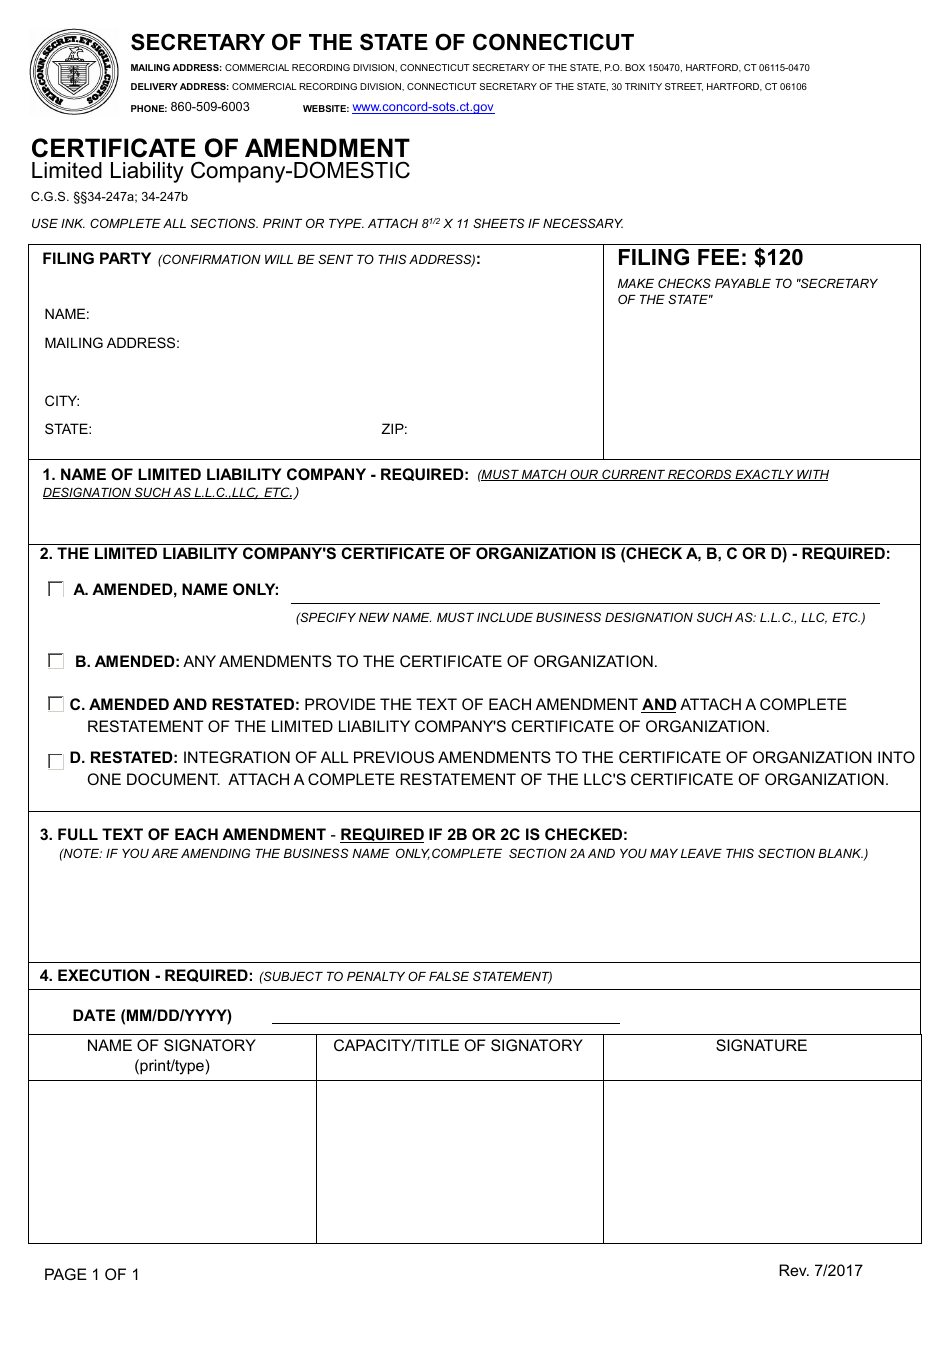 Certificate of Amendment - Limited Liability Company-Domestic - Connecticut, Page 1